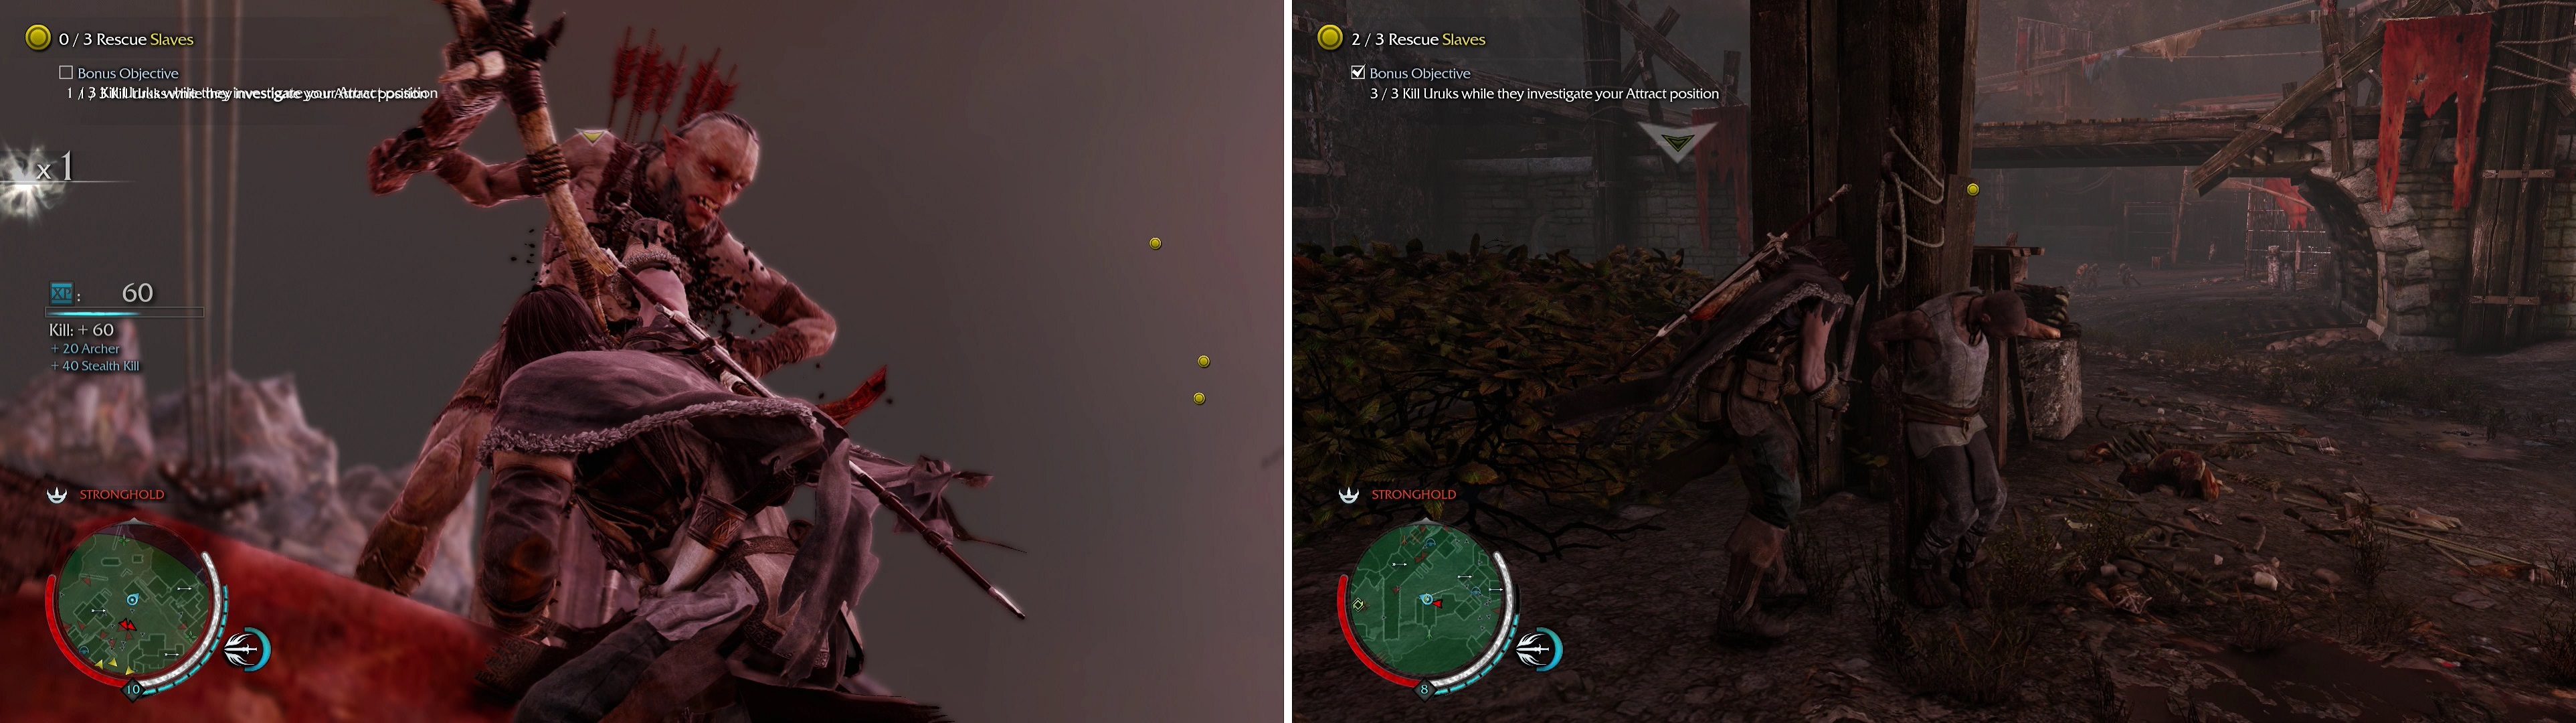 The easiest way to accomplish the bonus objective for this mission is to Attract foes while on a ledge, then perform a Ledge Kill (left). Once you’ve killed enough, free the slaves (right).